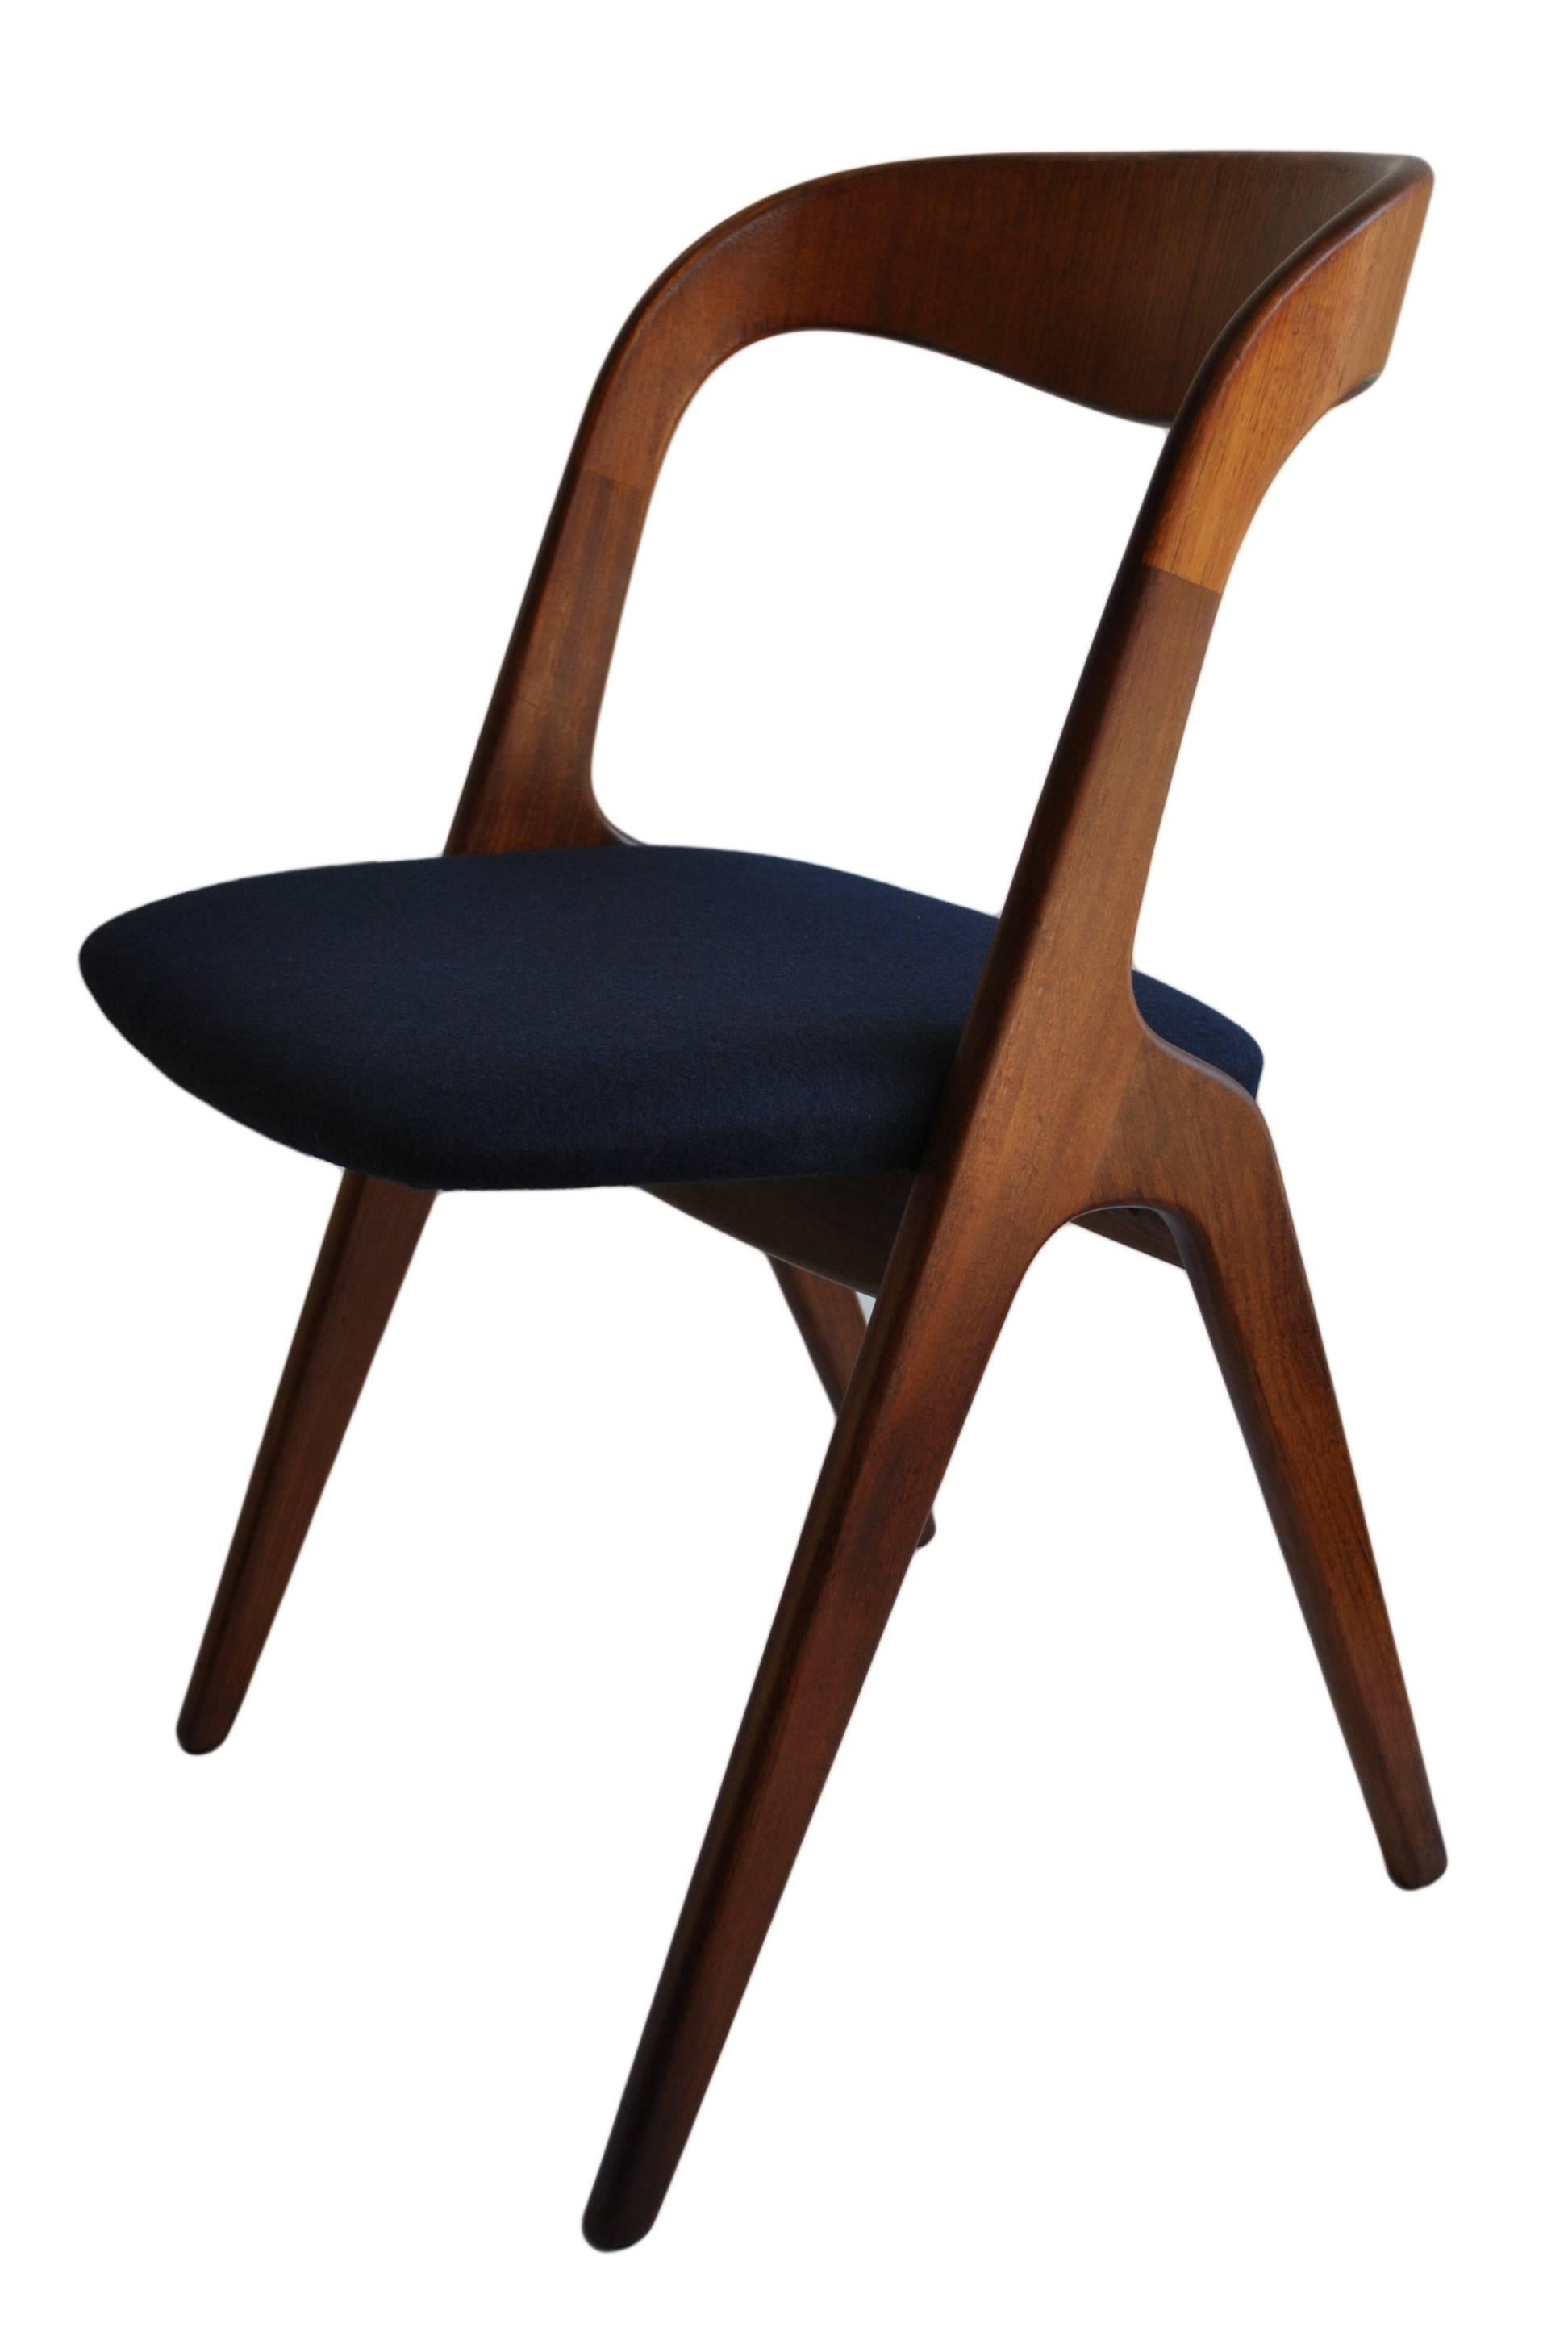 Beautifully sleek Vamo Sonderborg chairs. Re-oiled teak frames with professionally re-upholstered seats in blue felt.
Produced in Denmark, circa 1960.
 